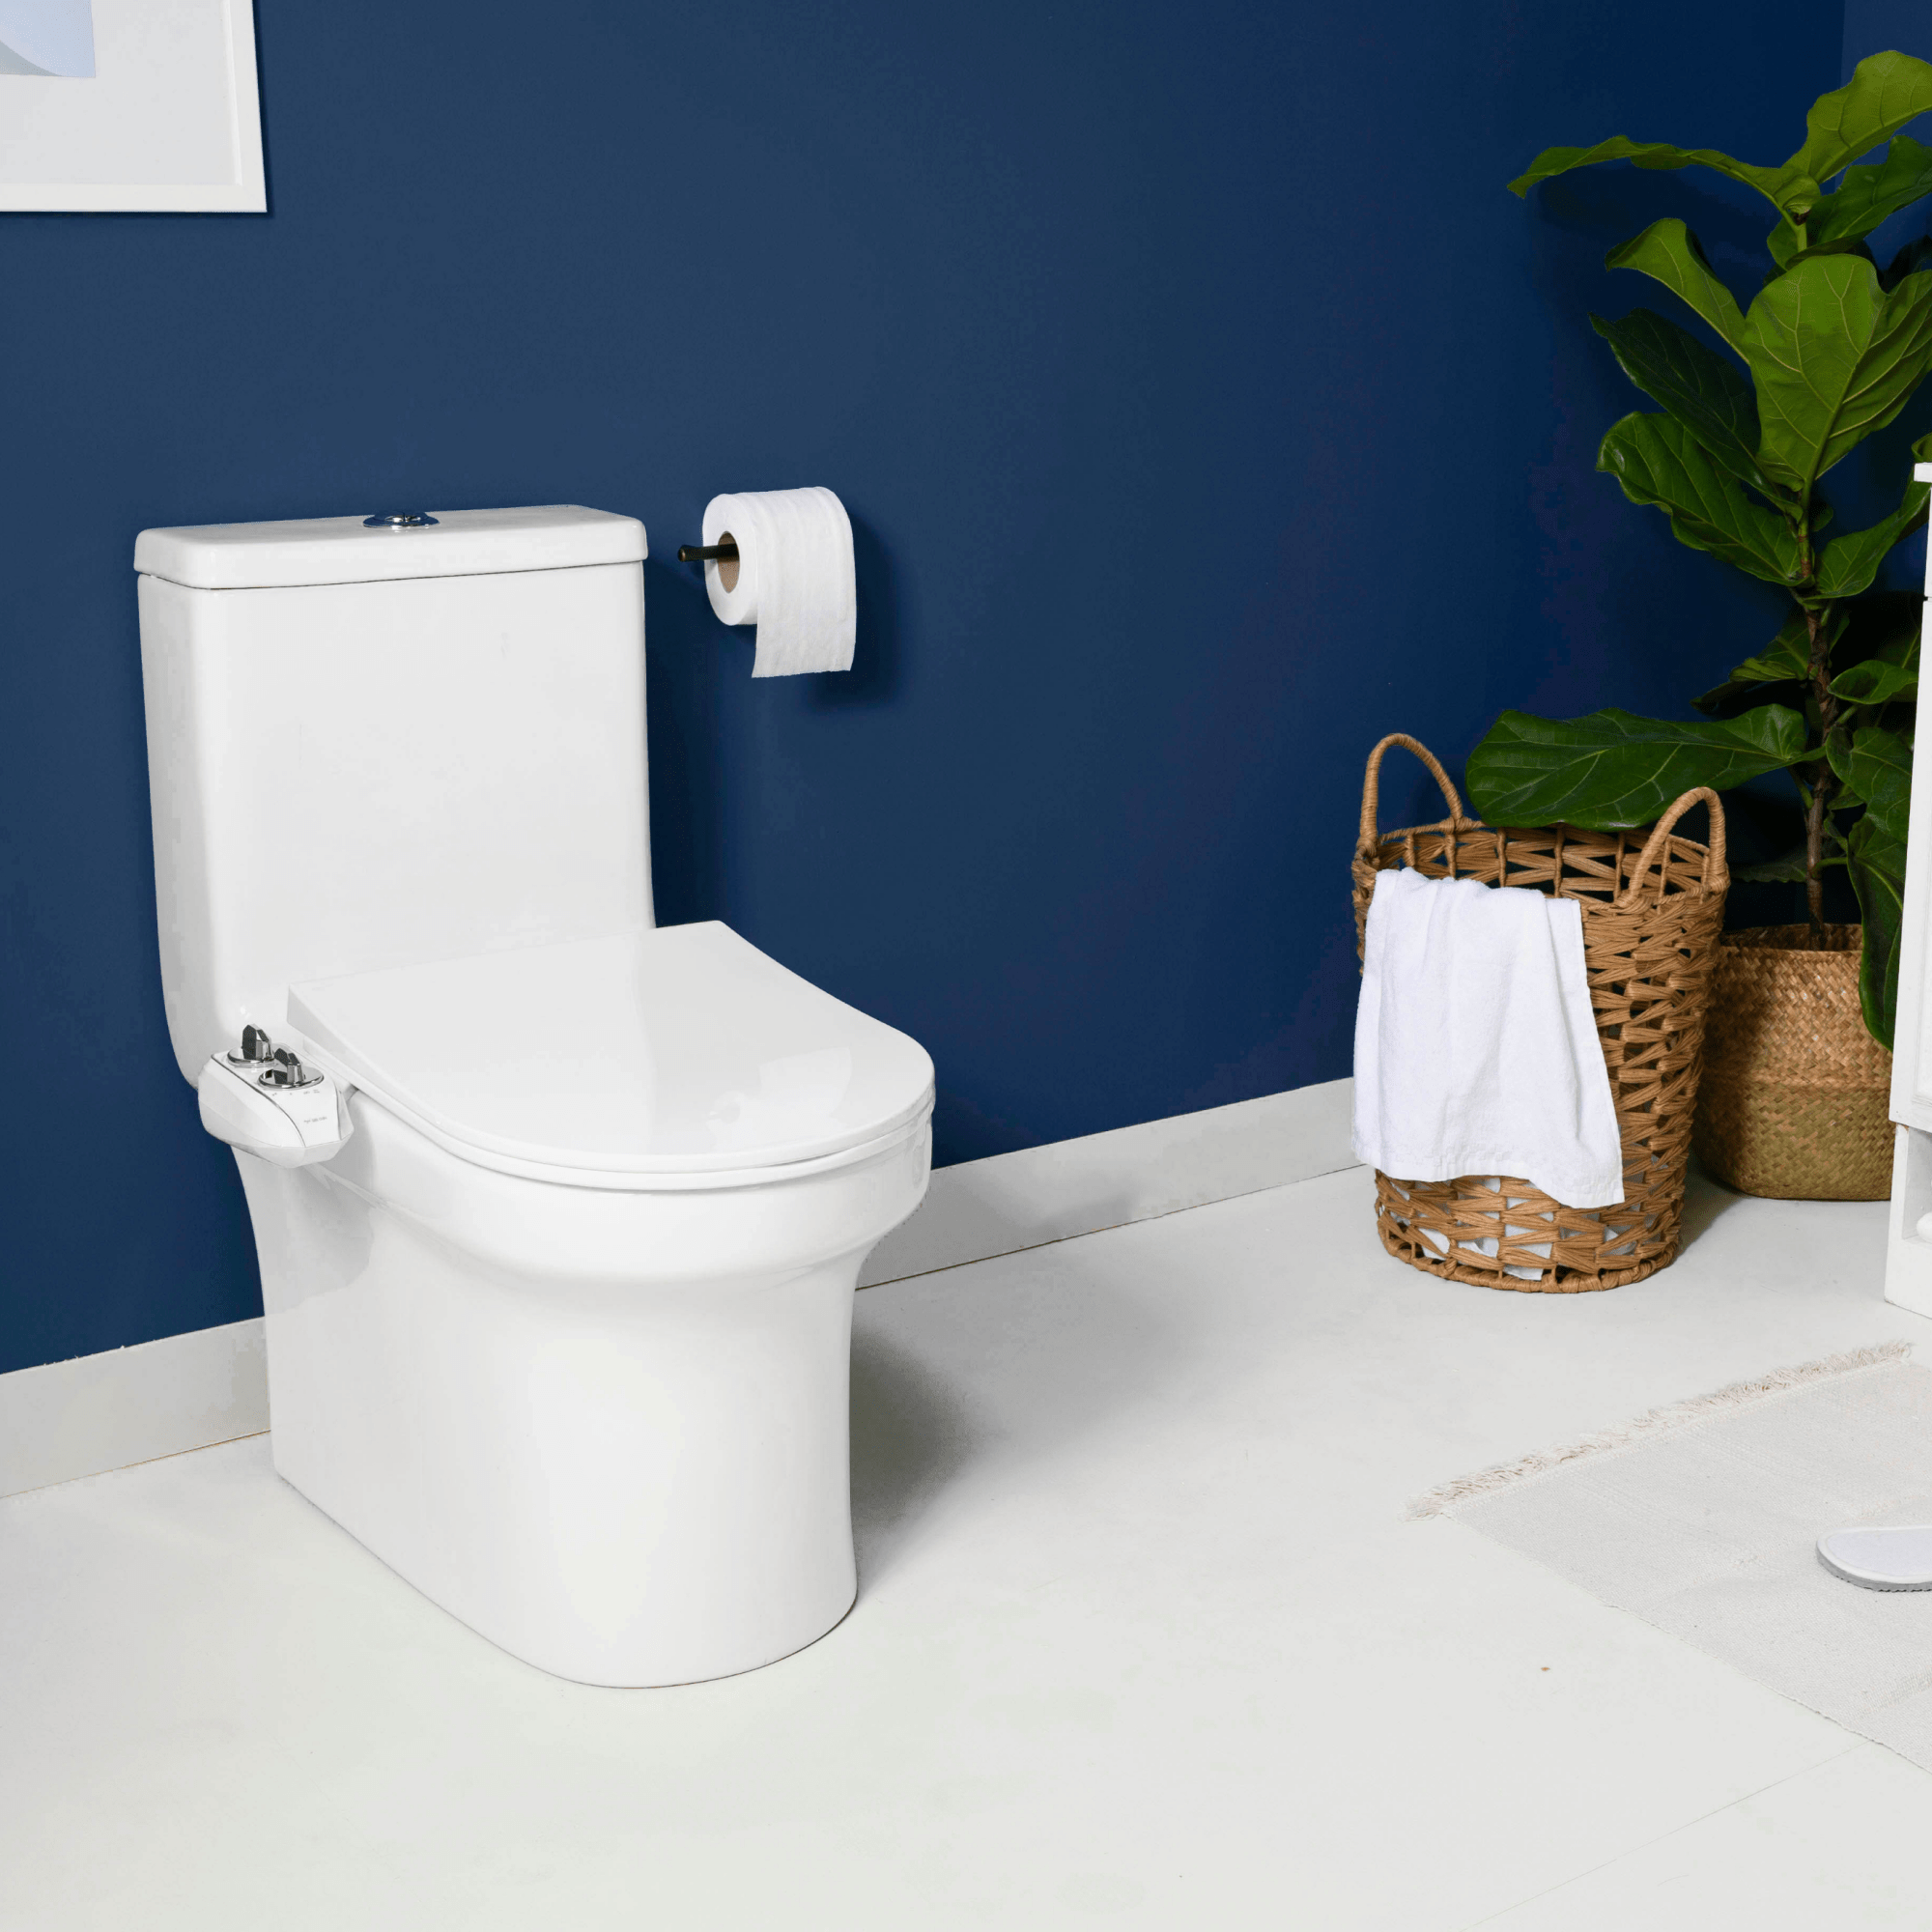 Imperfect Packaging - NEO 185 Plus Chrome installed on a toilet, in a modern blue bathroom with a plant and basket of towels